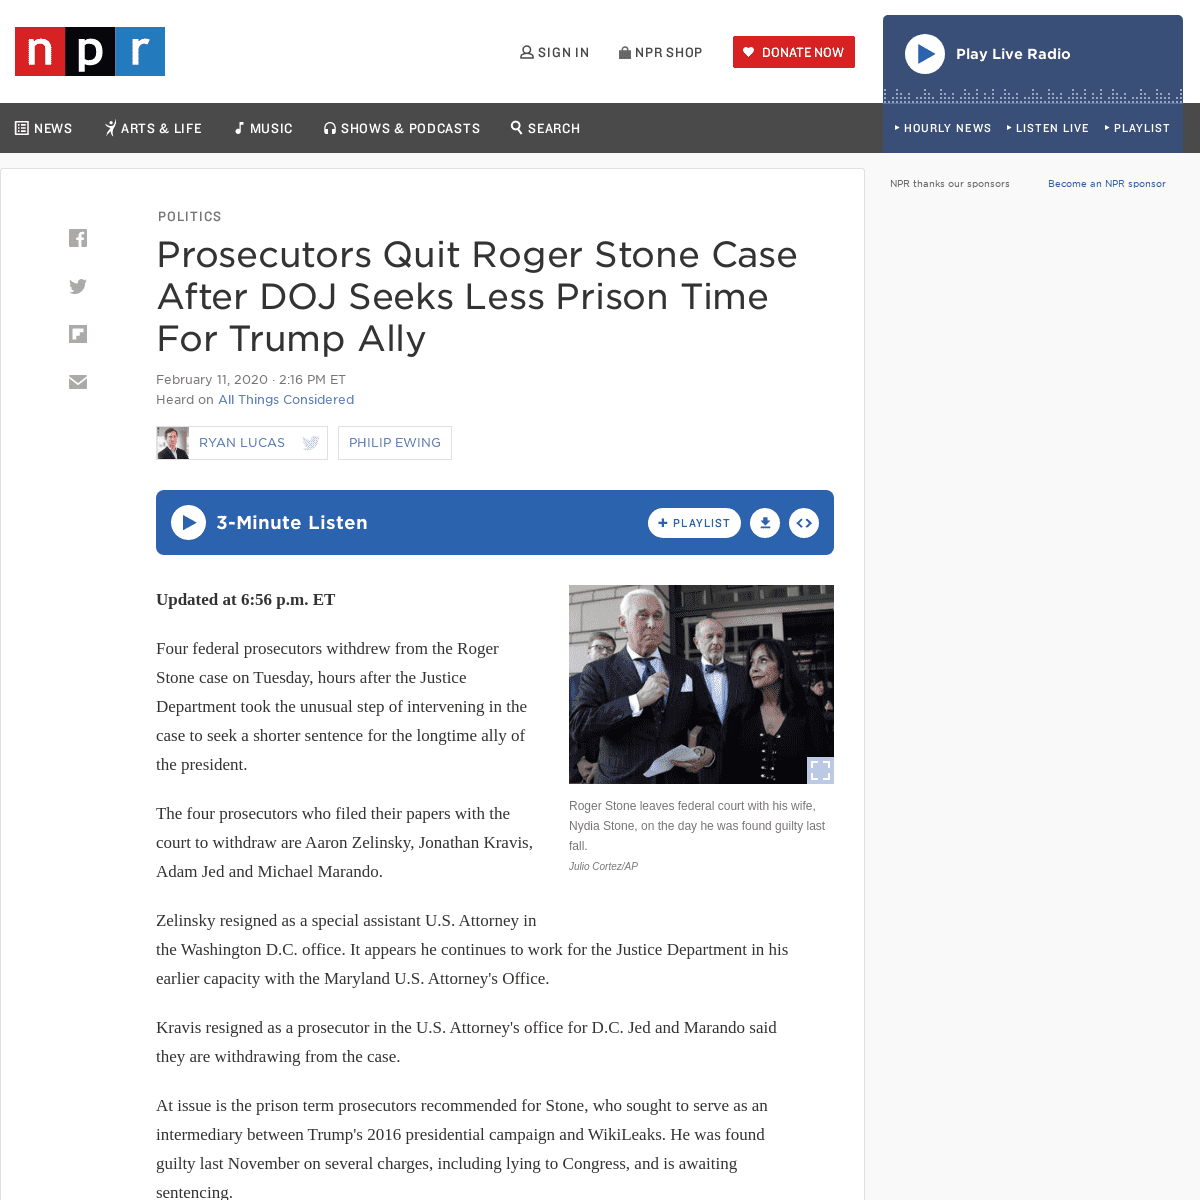 A complete backup of www.npr.org/2020/02/11/804888522/doj-to-revise-sentencing-request-for-roger-stone-following-trump-tweet